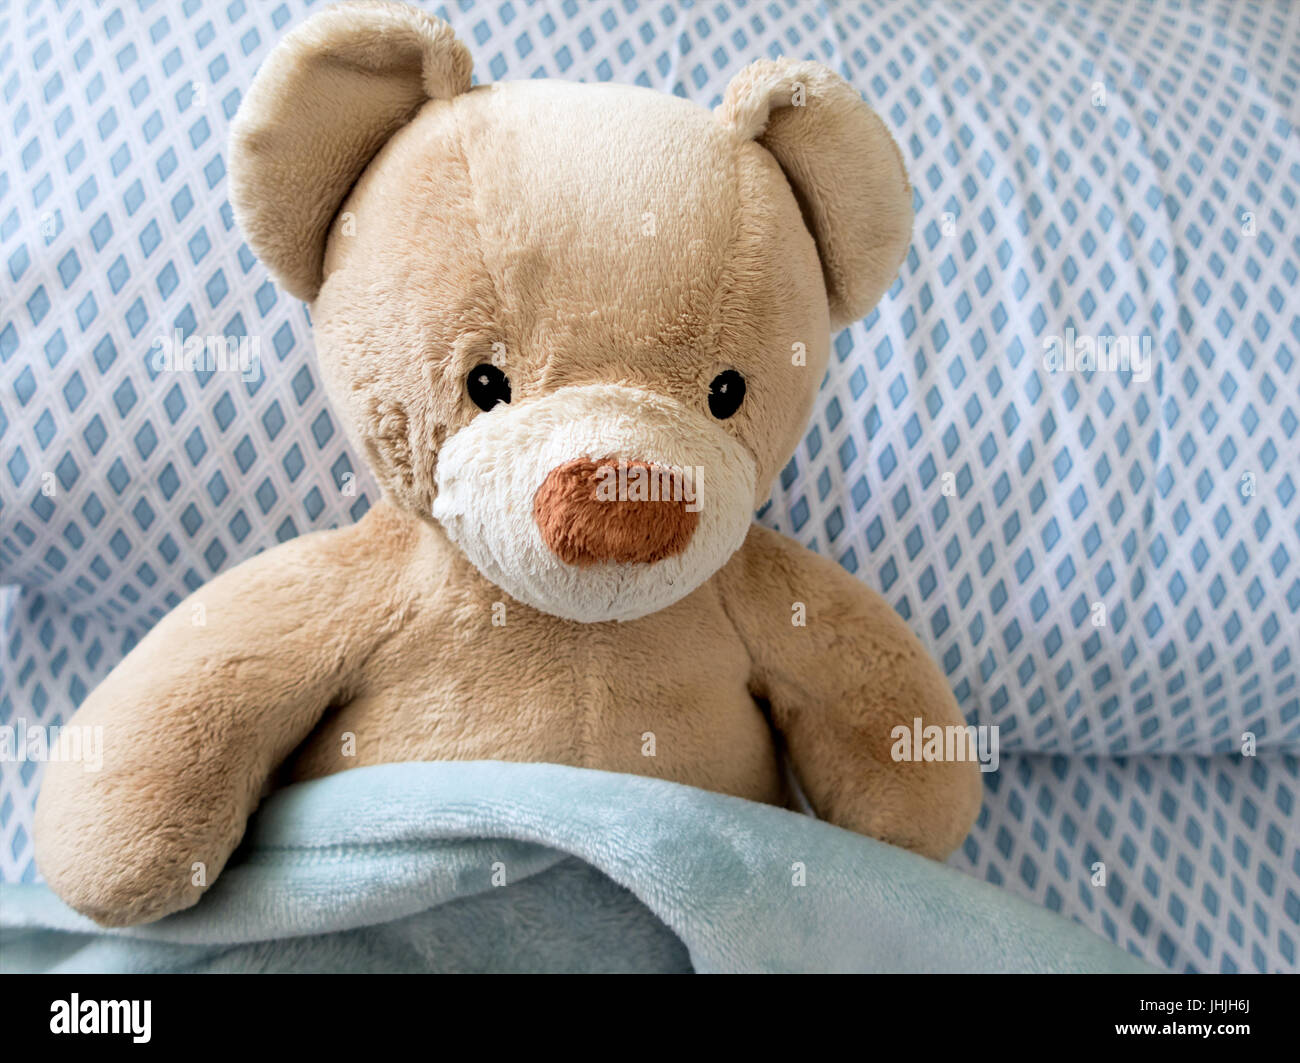 A tan teddy bear sitting in bed with a blue checkered pillow and blue blanket. Stock Photo